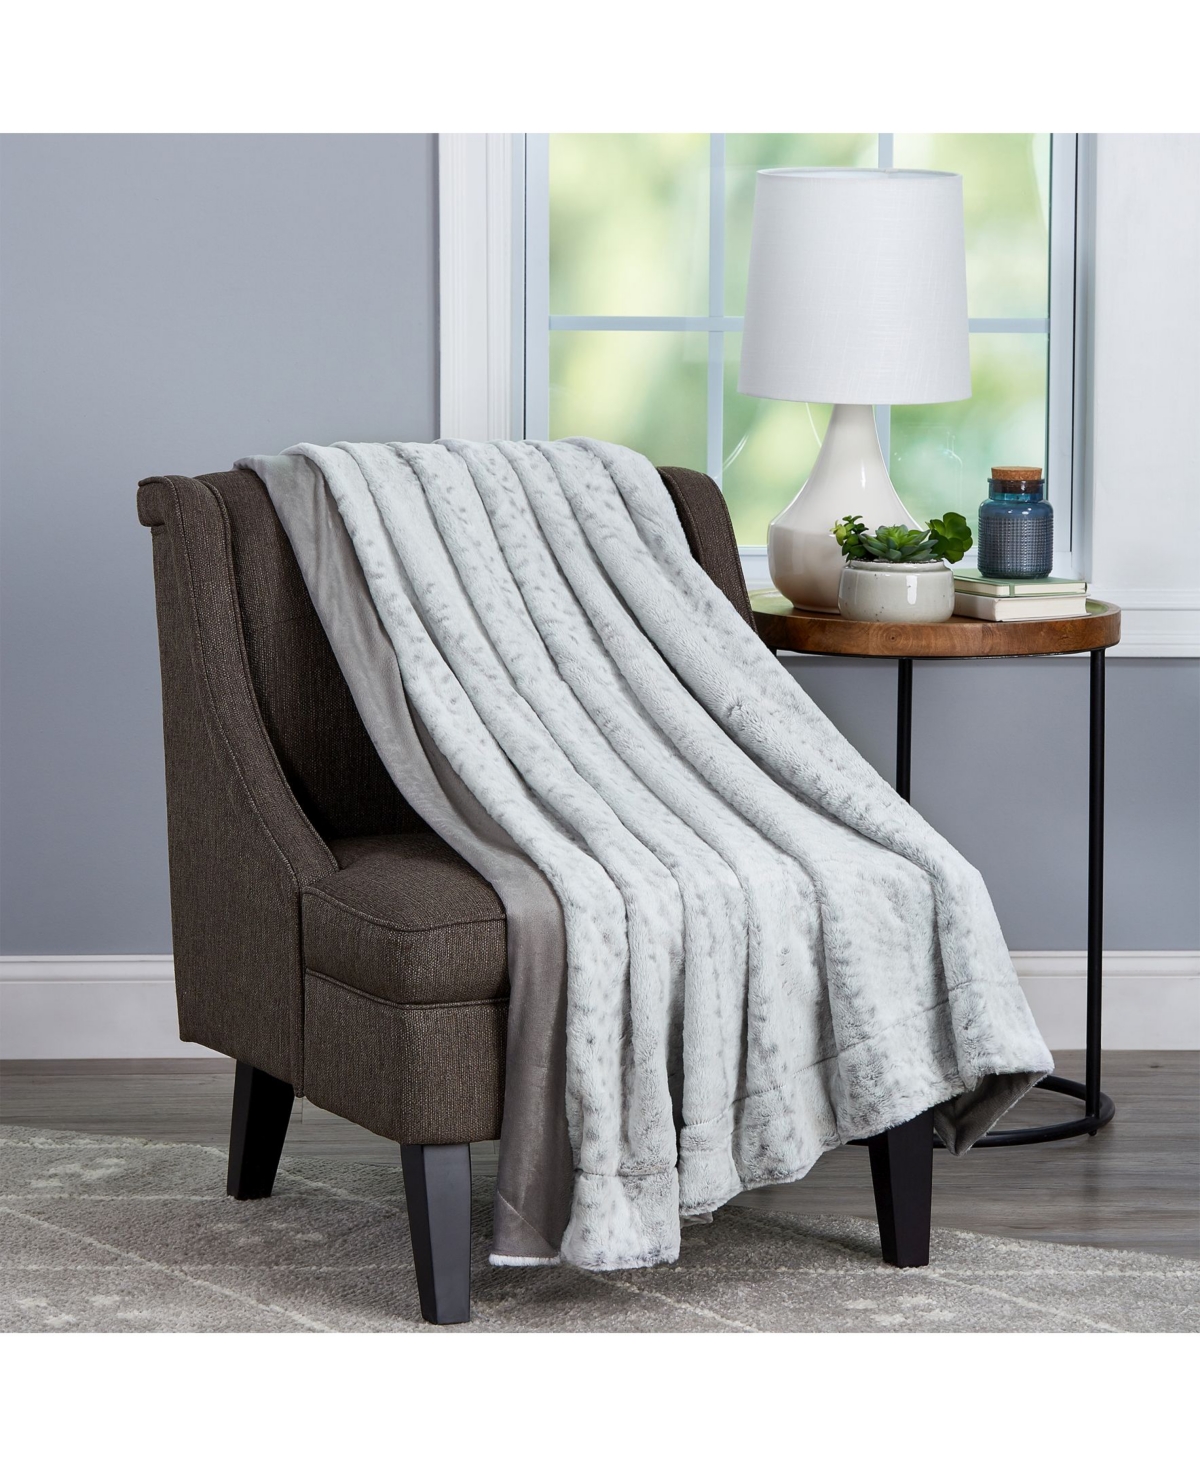 Baldwin Home Oversized Luxuriously Fluffy Vintage-Look Soft Throw Blanket